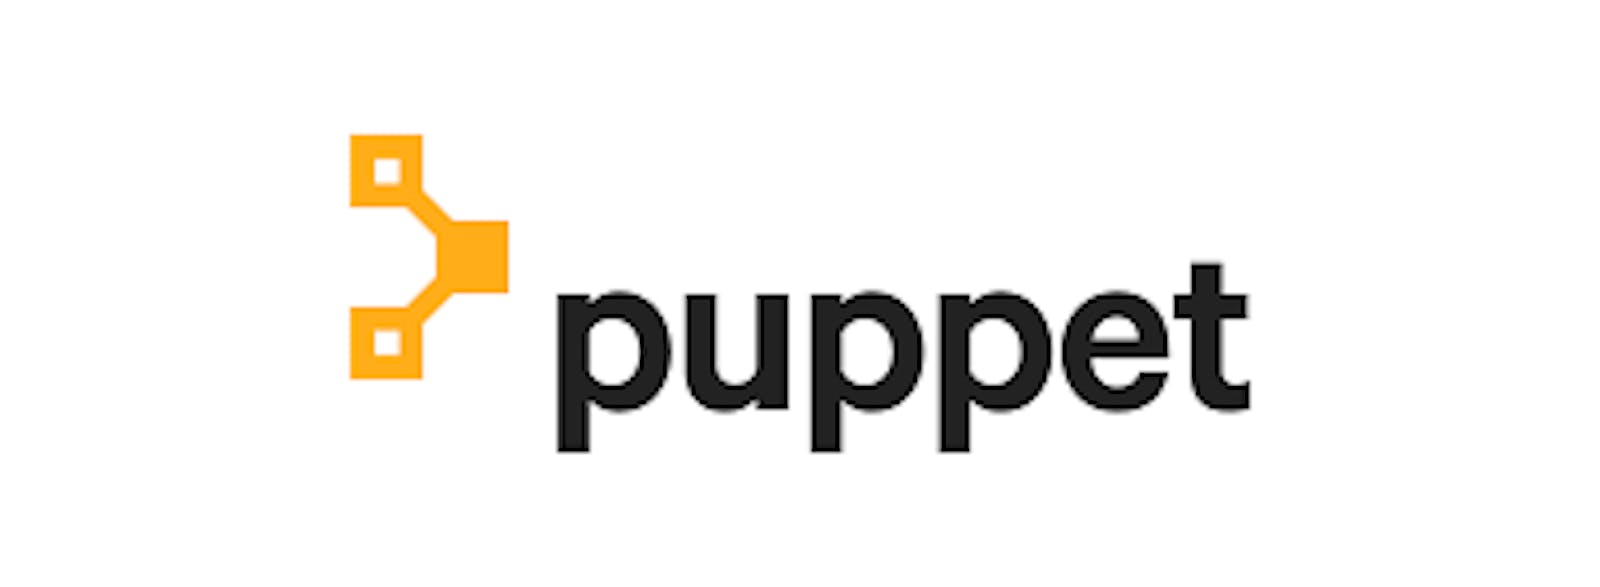 Alternative to Chef and Ansible - The Puppet